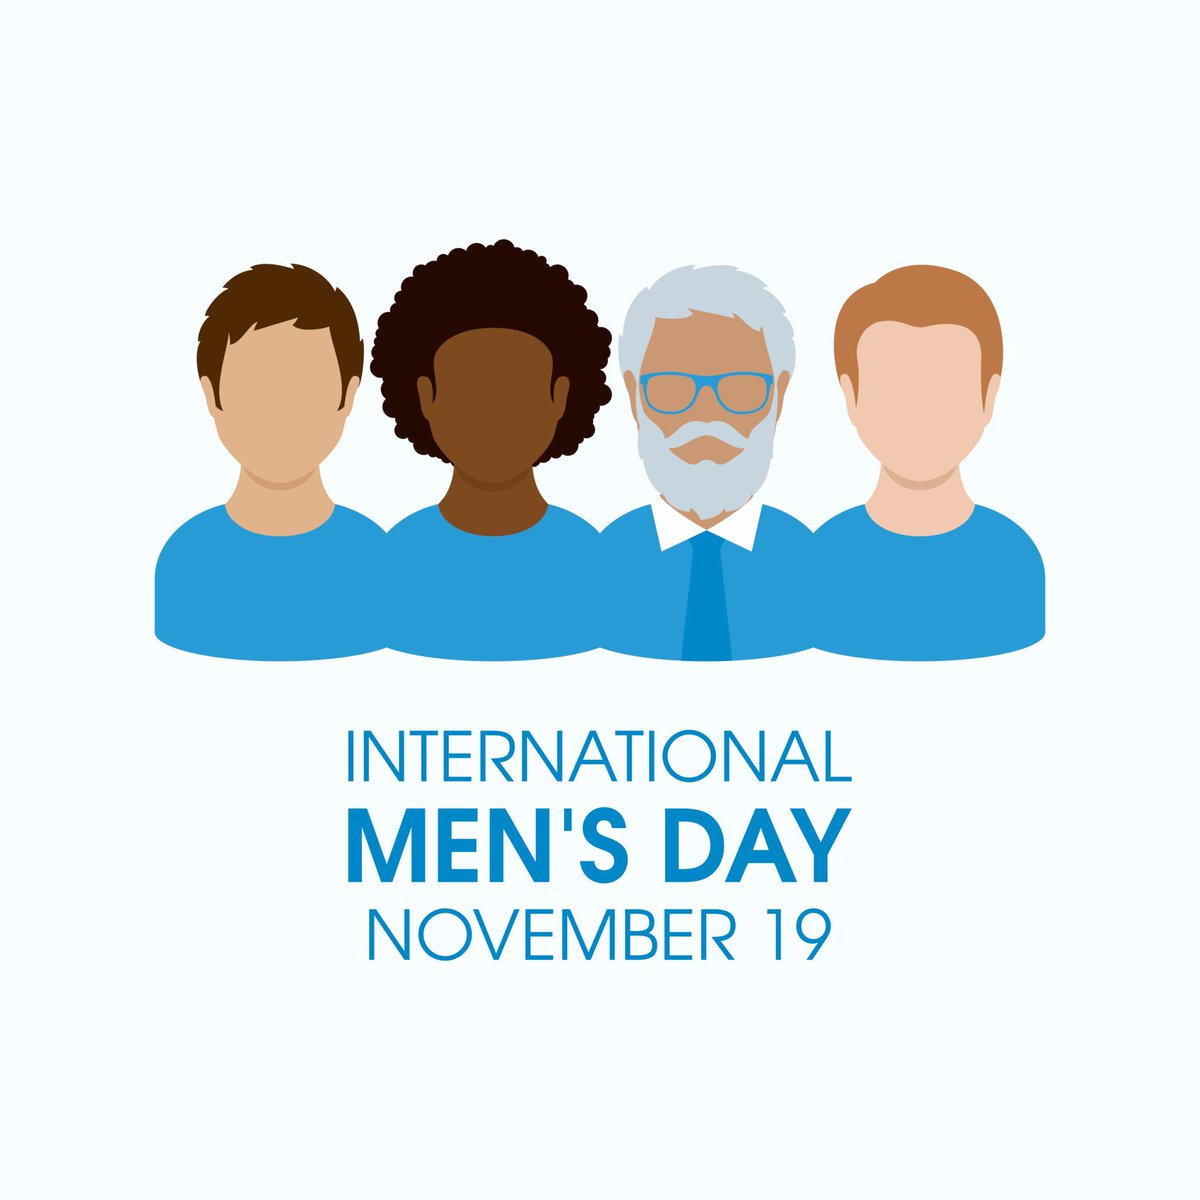 On International Men’s Day, a reminder to all the wonderful men out there: Your voices and stories matter. It’s okay to speak up about your struggles. You’re not alone. Each of you is unique and valued. Let’s support each other. 💙 #InternationalMensDay